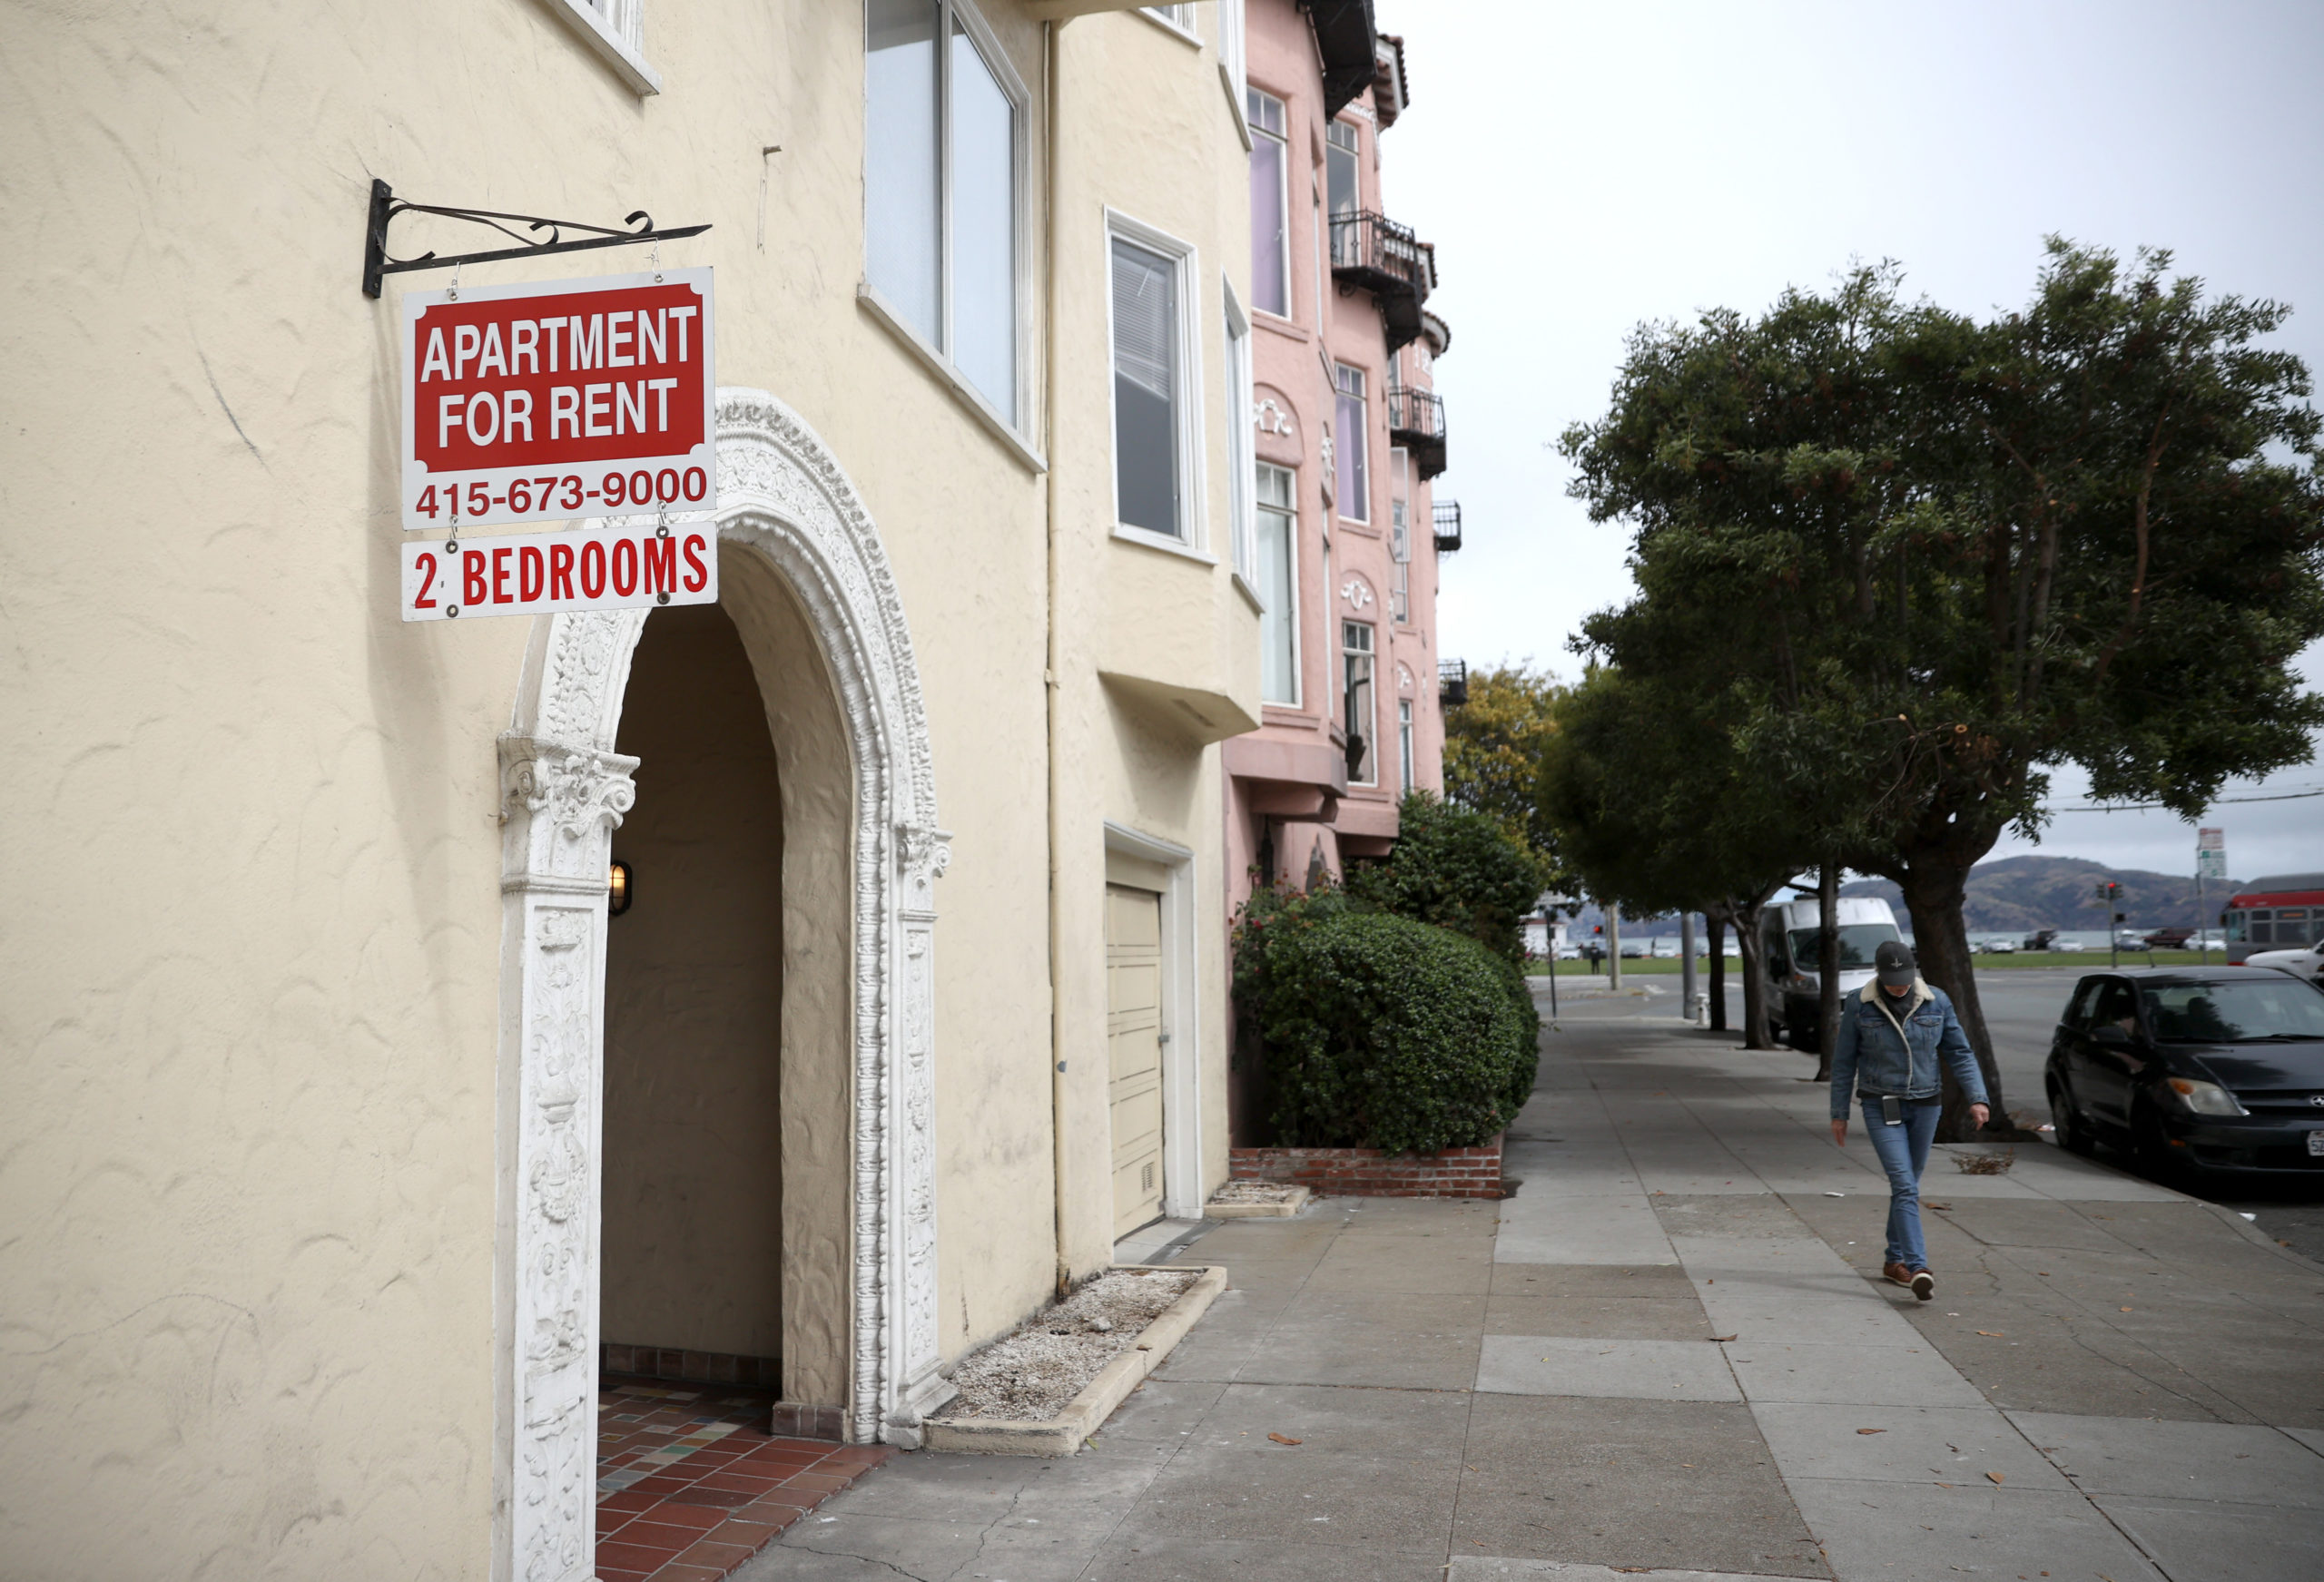 SAN FRANCISCO, CALIFORNIA - JUNE 02: A pedestrian walks by a "for rent" sign posted in front of an apartment building on June 02, 2021 in San Francisco, California. After San Francisco rental prices plummeted during the pandemic shutdown, prices have surged back to pre-pandemic levels. (Photo by Justin Sullivan/Getty Images)